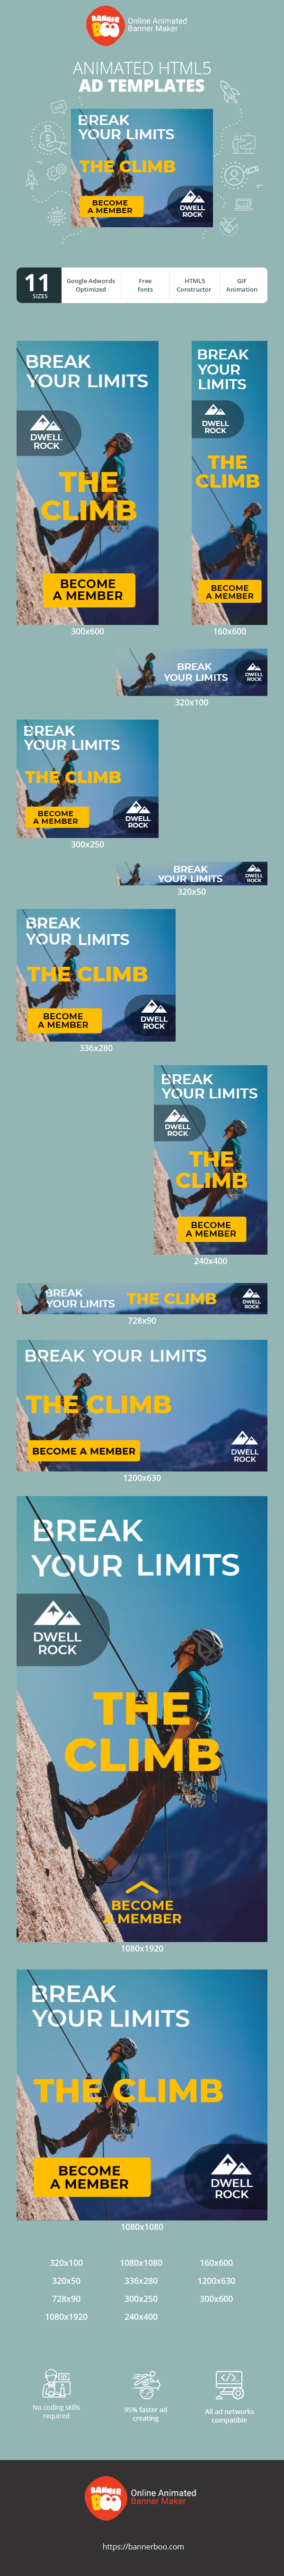 Banner ad template — The Climb —Break Your Limits